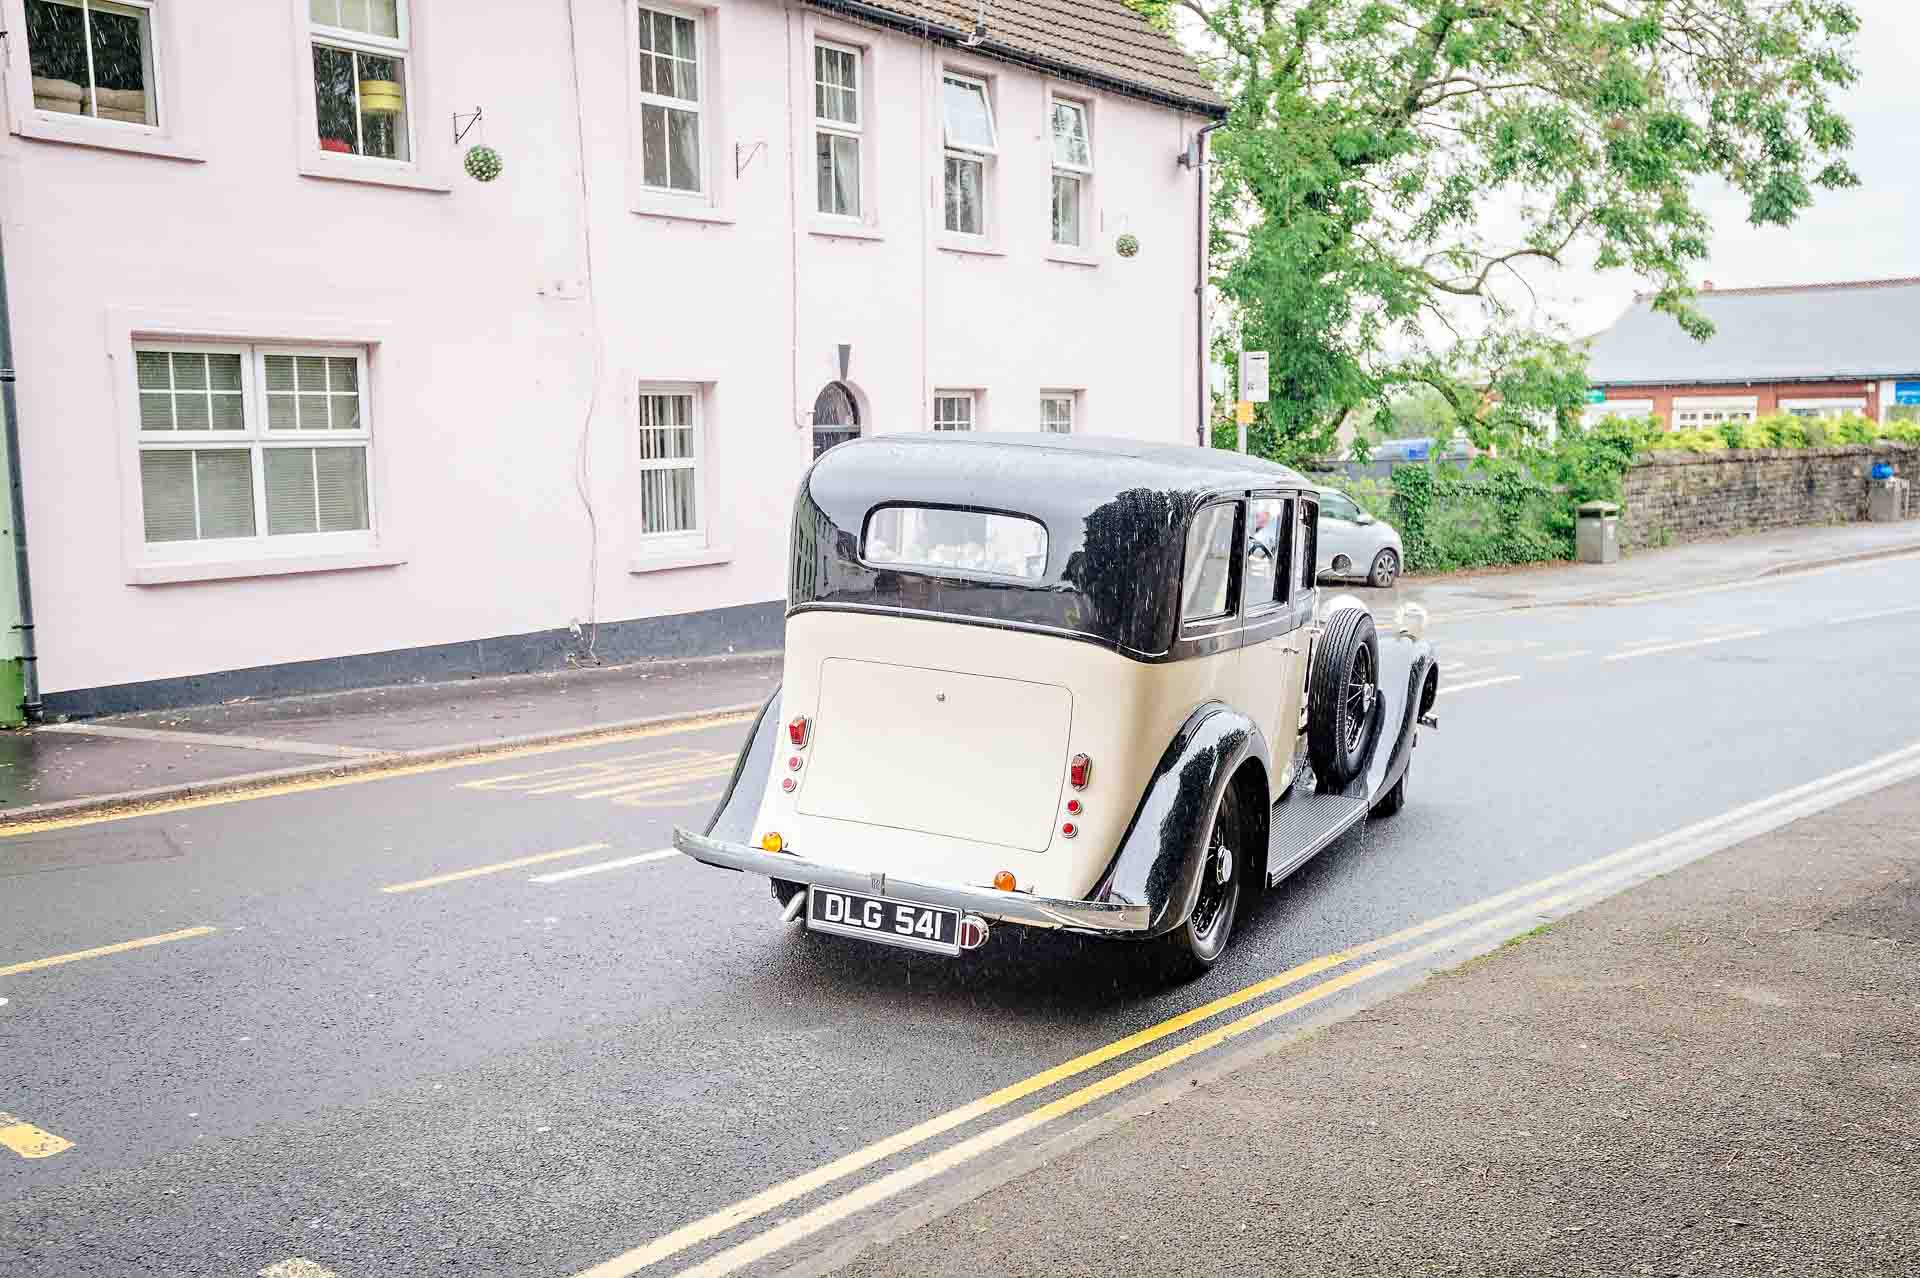 Rolls Royce pulling away from kerb from back at Caerphilly wedding